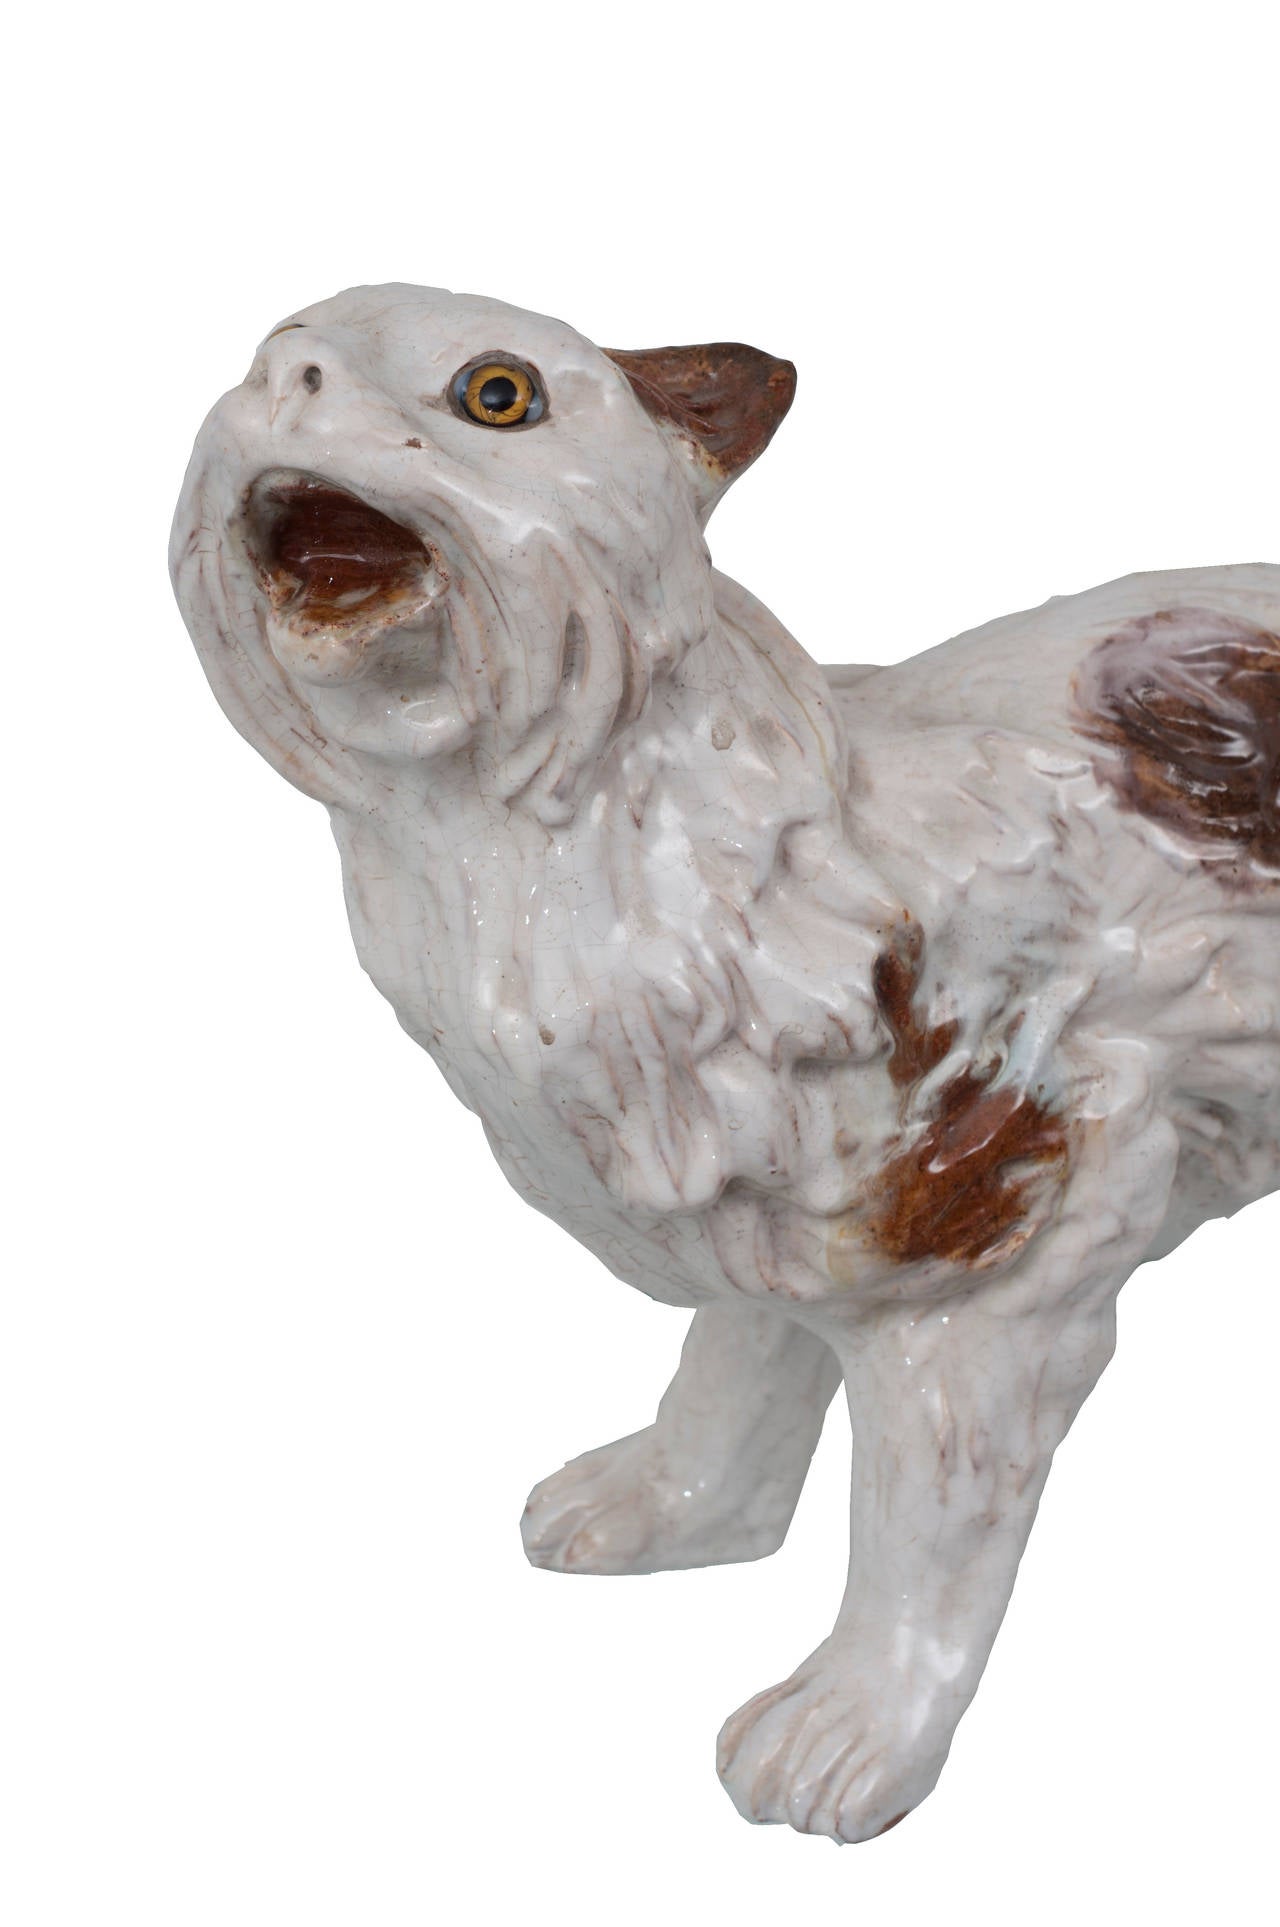 A bavent brown and white enameled ceramic cat. Bavent is a town in Calvados Department of Basse, Normandy in Northwest of France and is well known for this type of ceramic animals that are put on the roof.